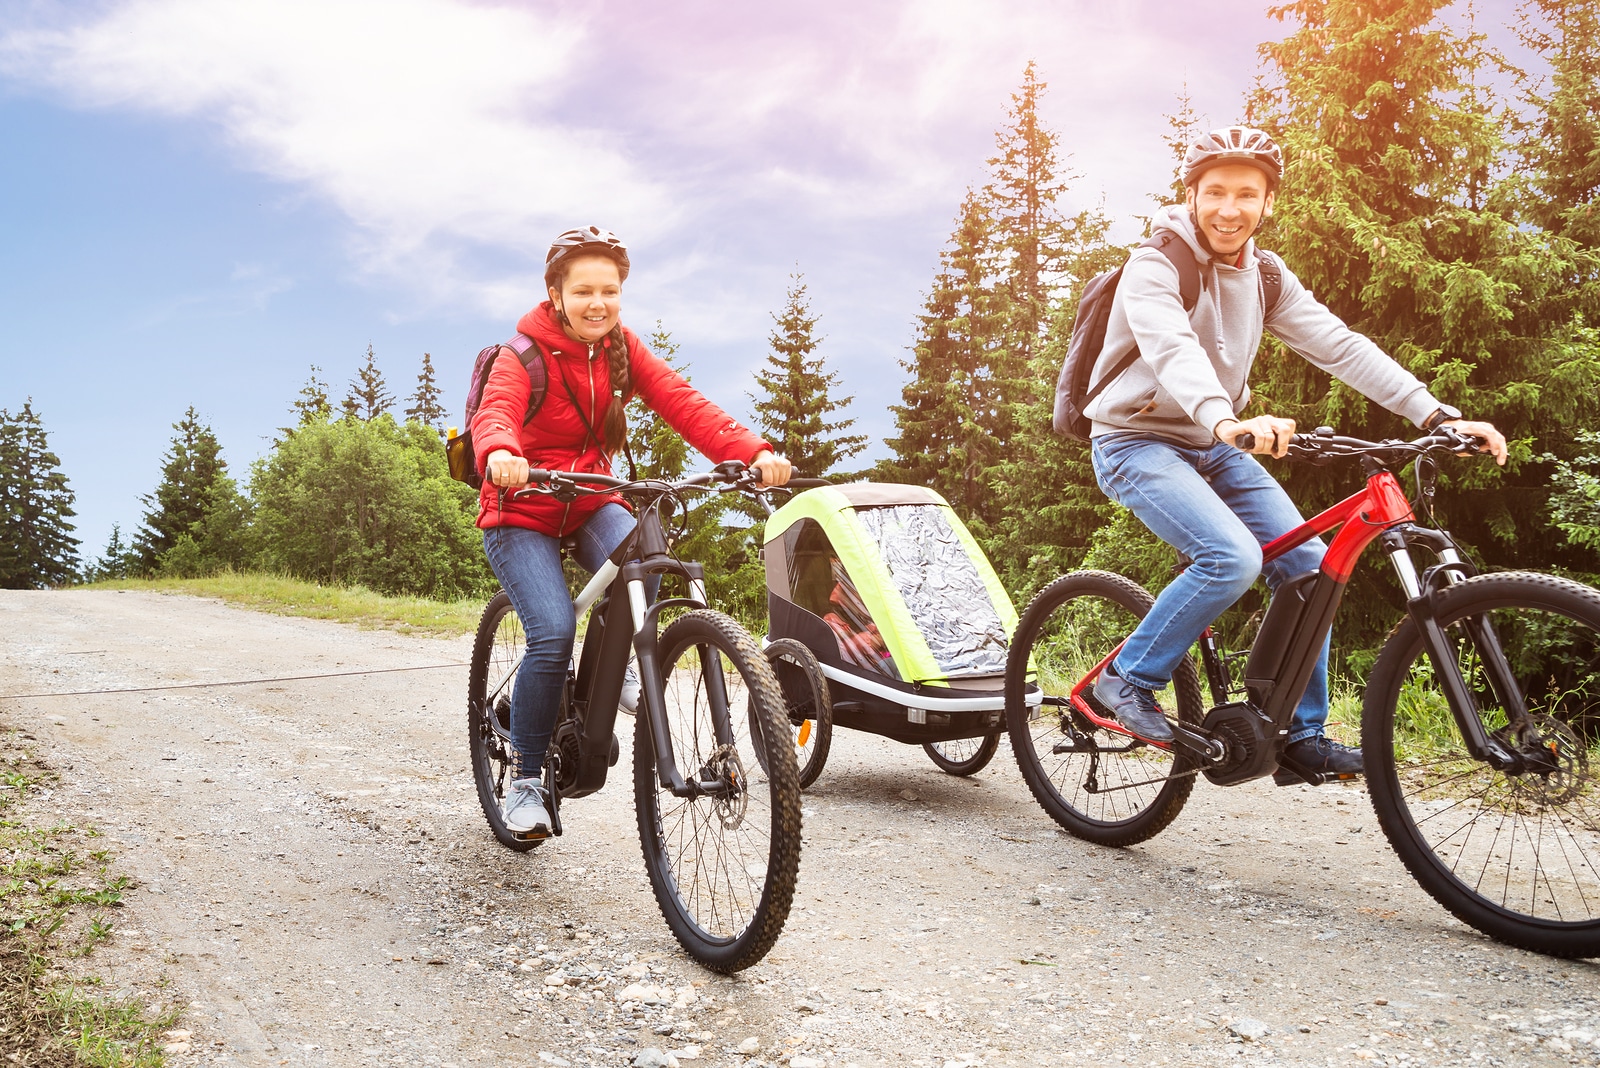 List of the Best Bike Trailers Review: Top Models Evaluated